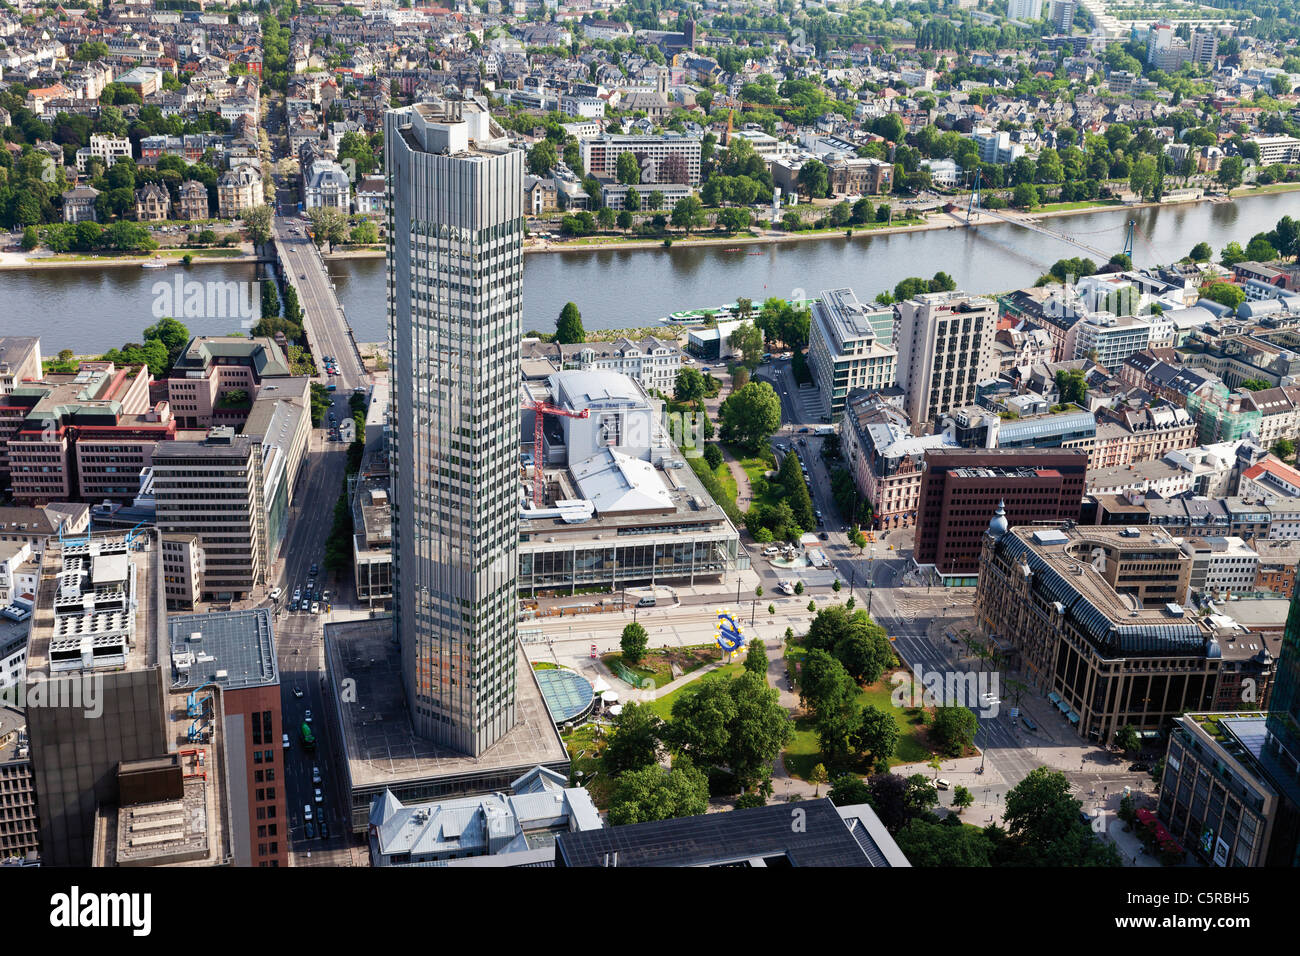 Europe, Germany, Hesse, Frankfurt, View of European Central Bank Stock Photo